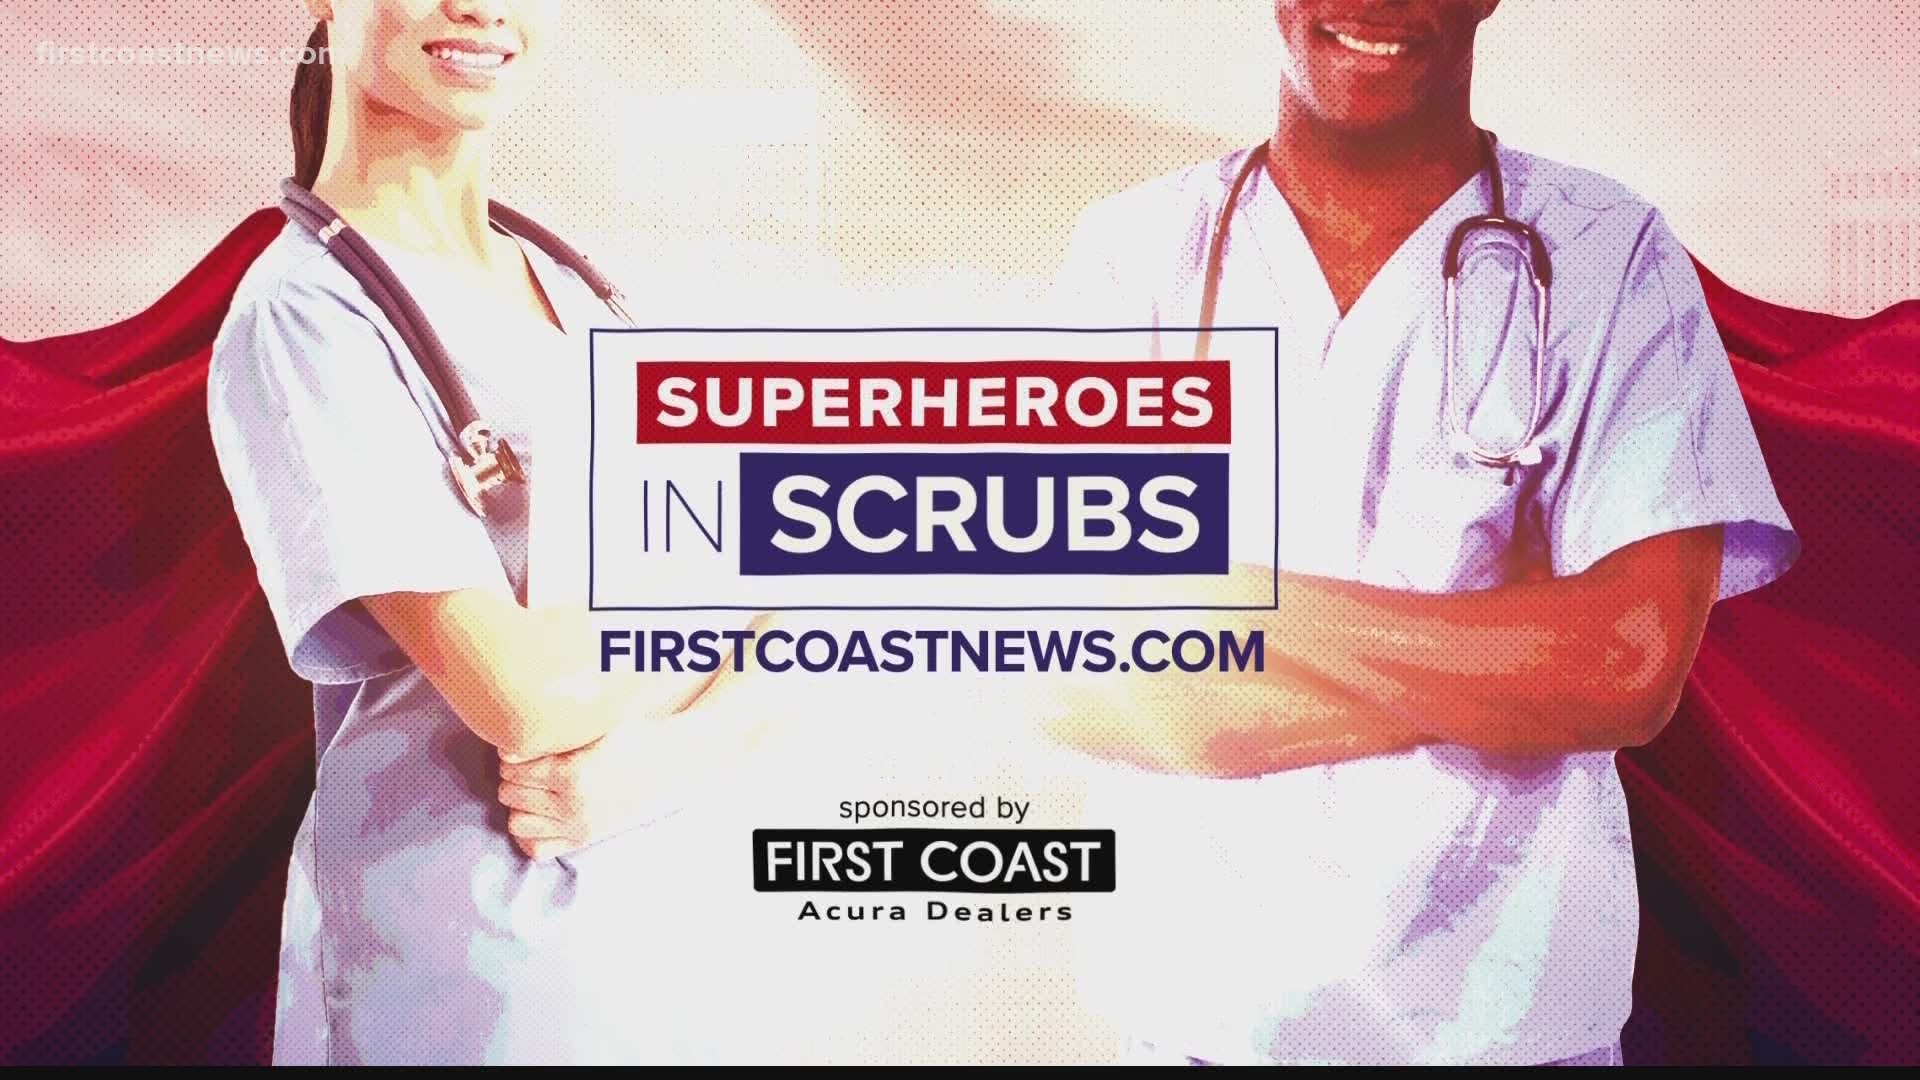 First Coast News is visiting local hospitals to give nurses shirts that say 'Superheroes in Scrubs' as a small way to say thank you for all they do.